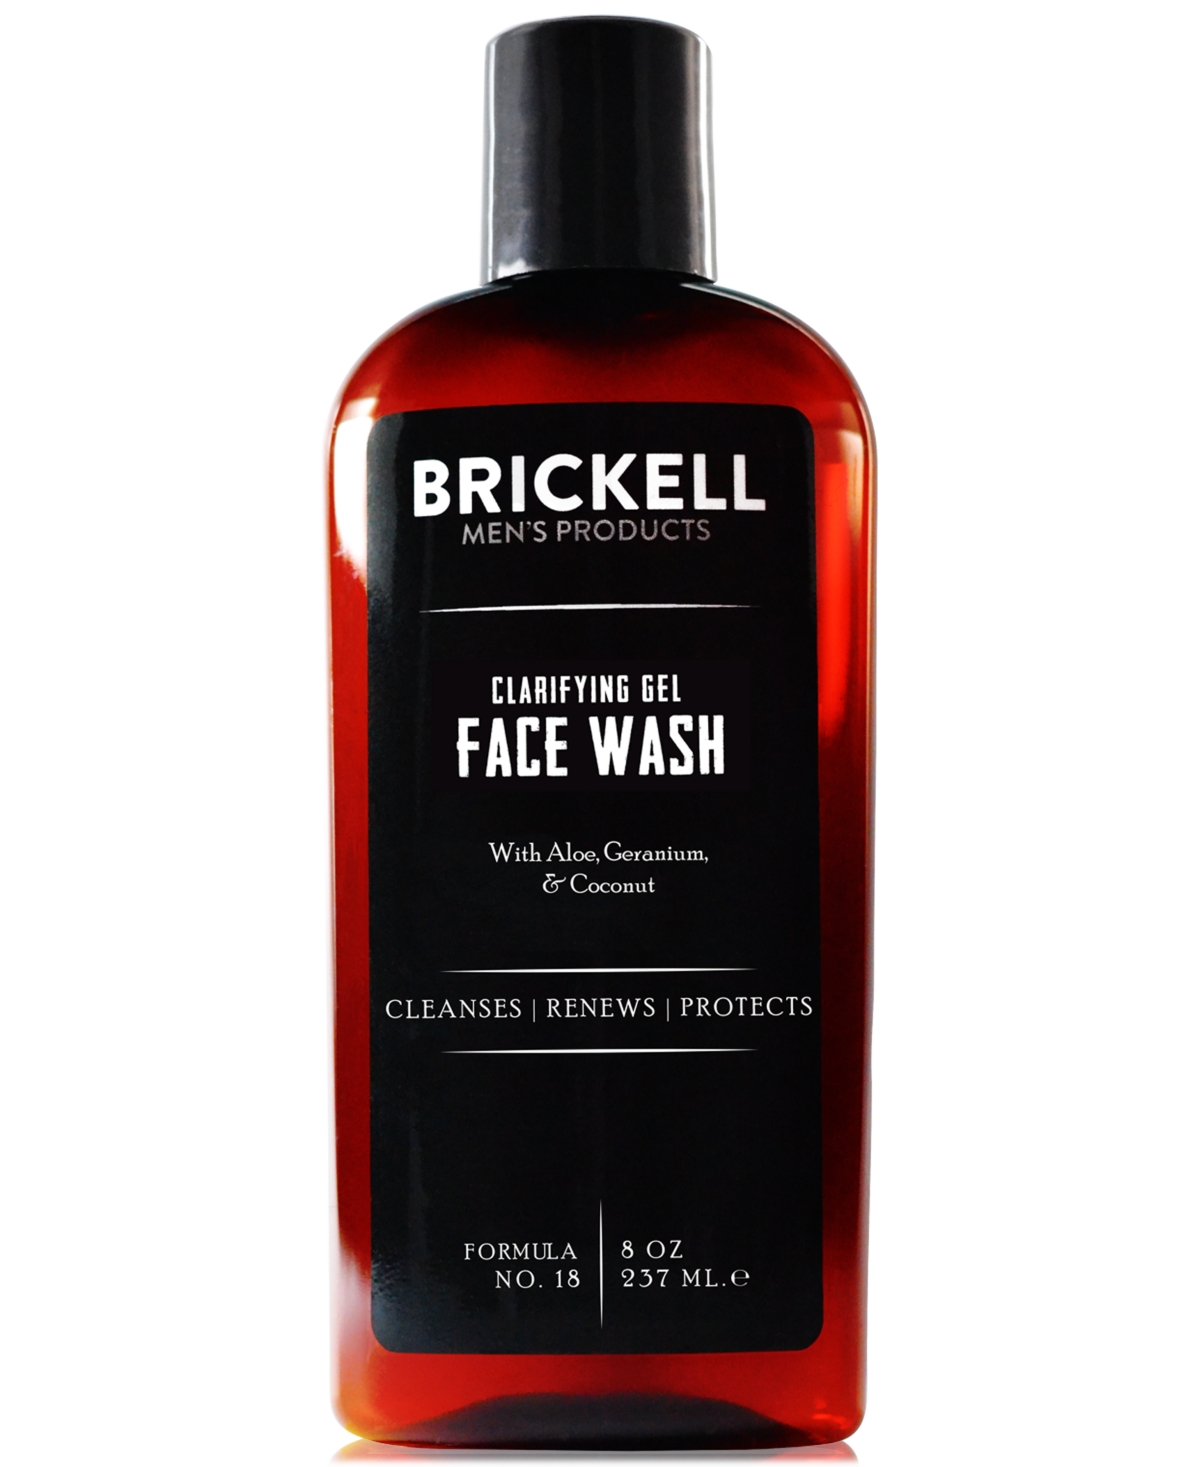 Brickell Mens Products Brickell Men's Products Clarifying Gel Face Wash, 8 Oz.